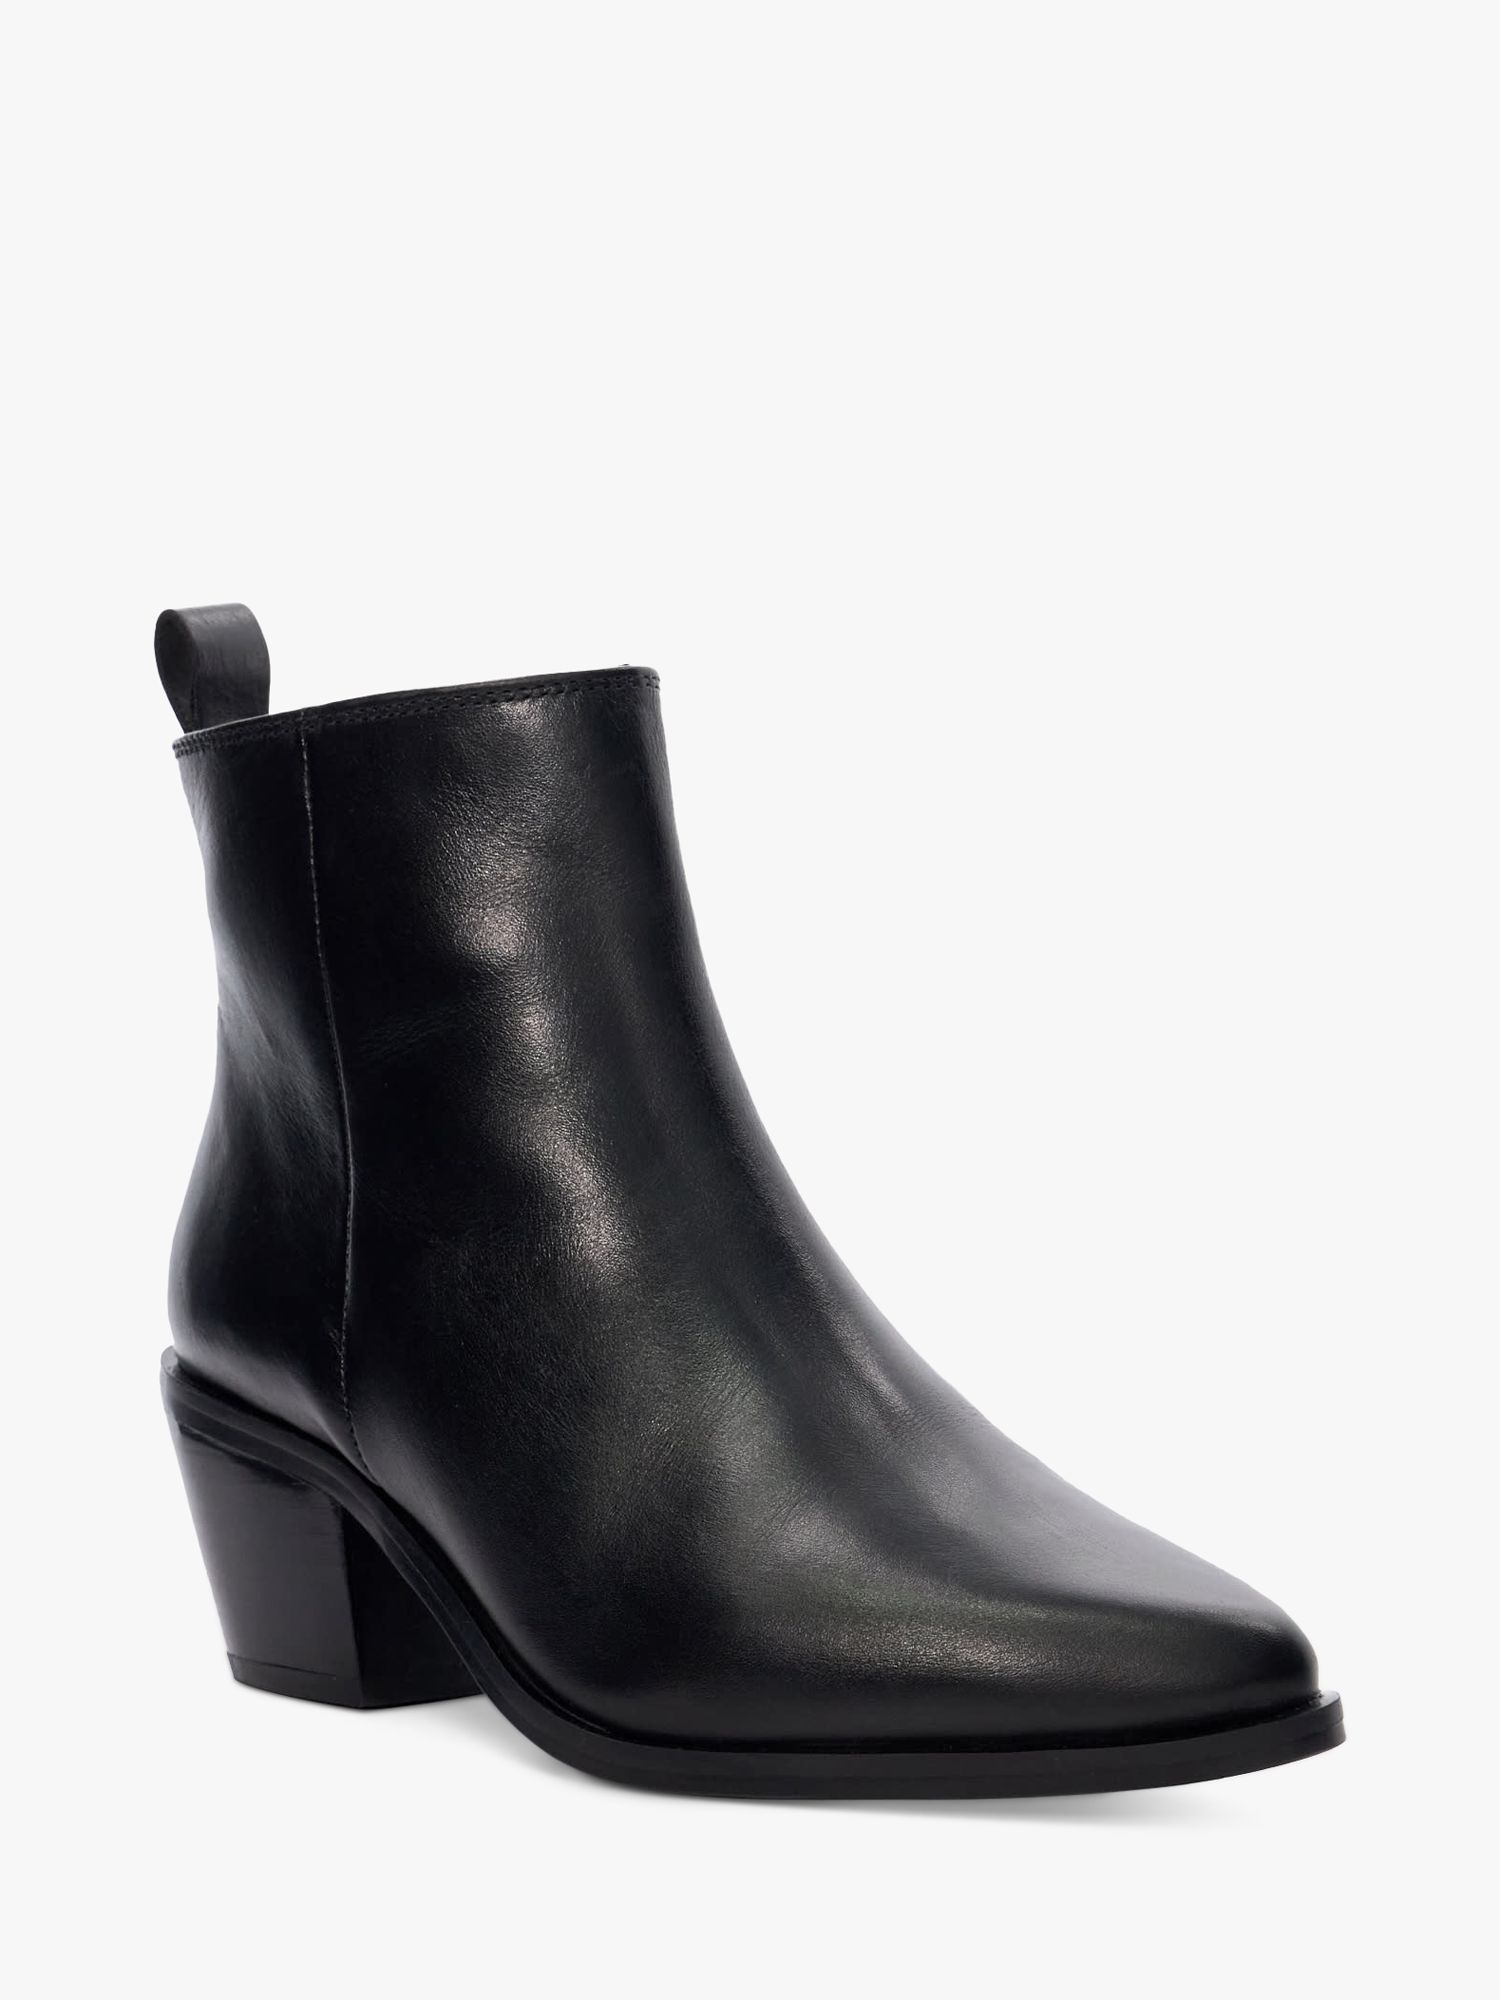 Dune Papz Leather Ankle Boots, Black at John Lewis & Partners